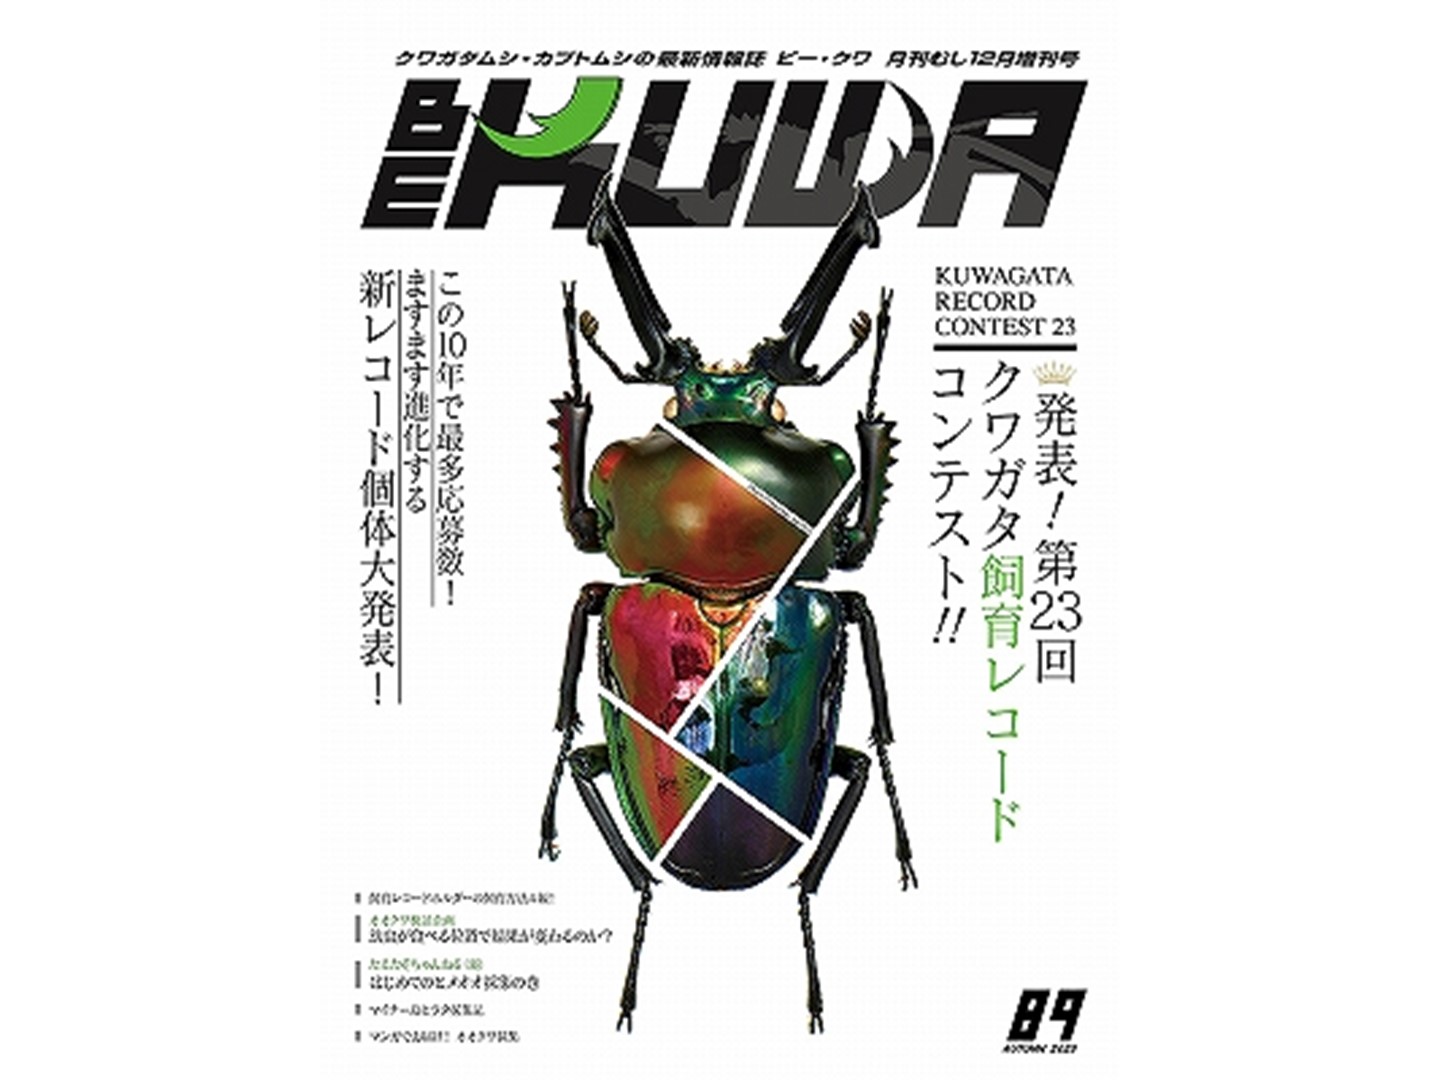 BE-KUWA 最新号No.89「第23回 クワガタ飼育コンテスト」 | D.D.A ism